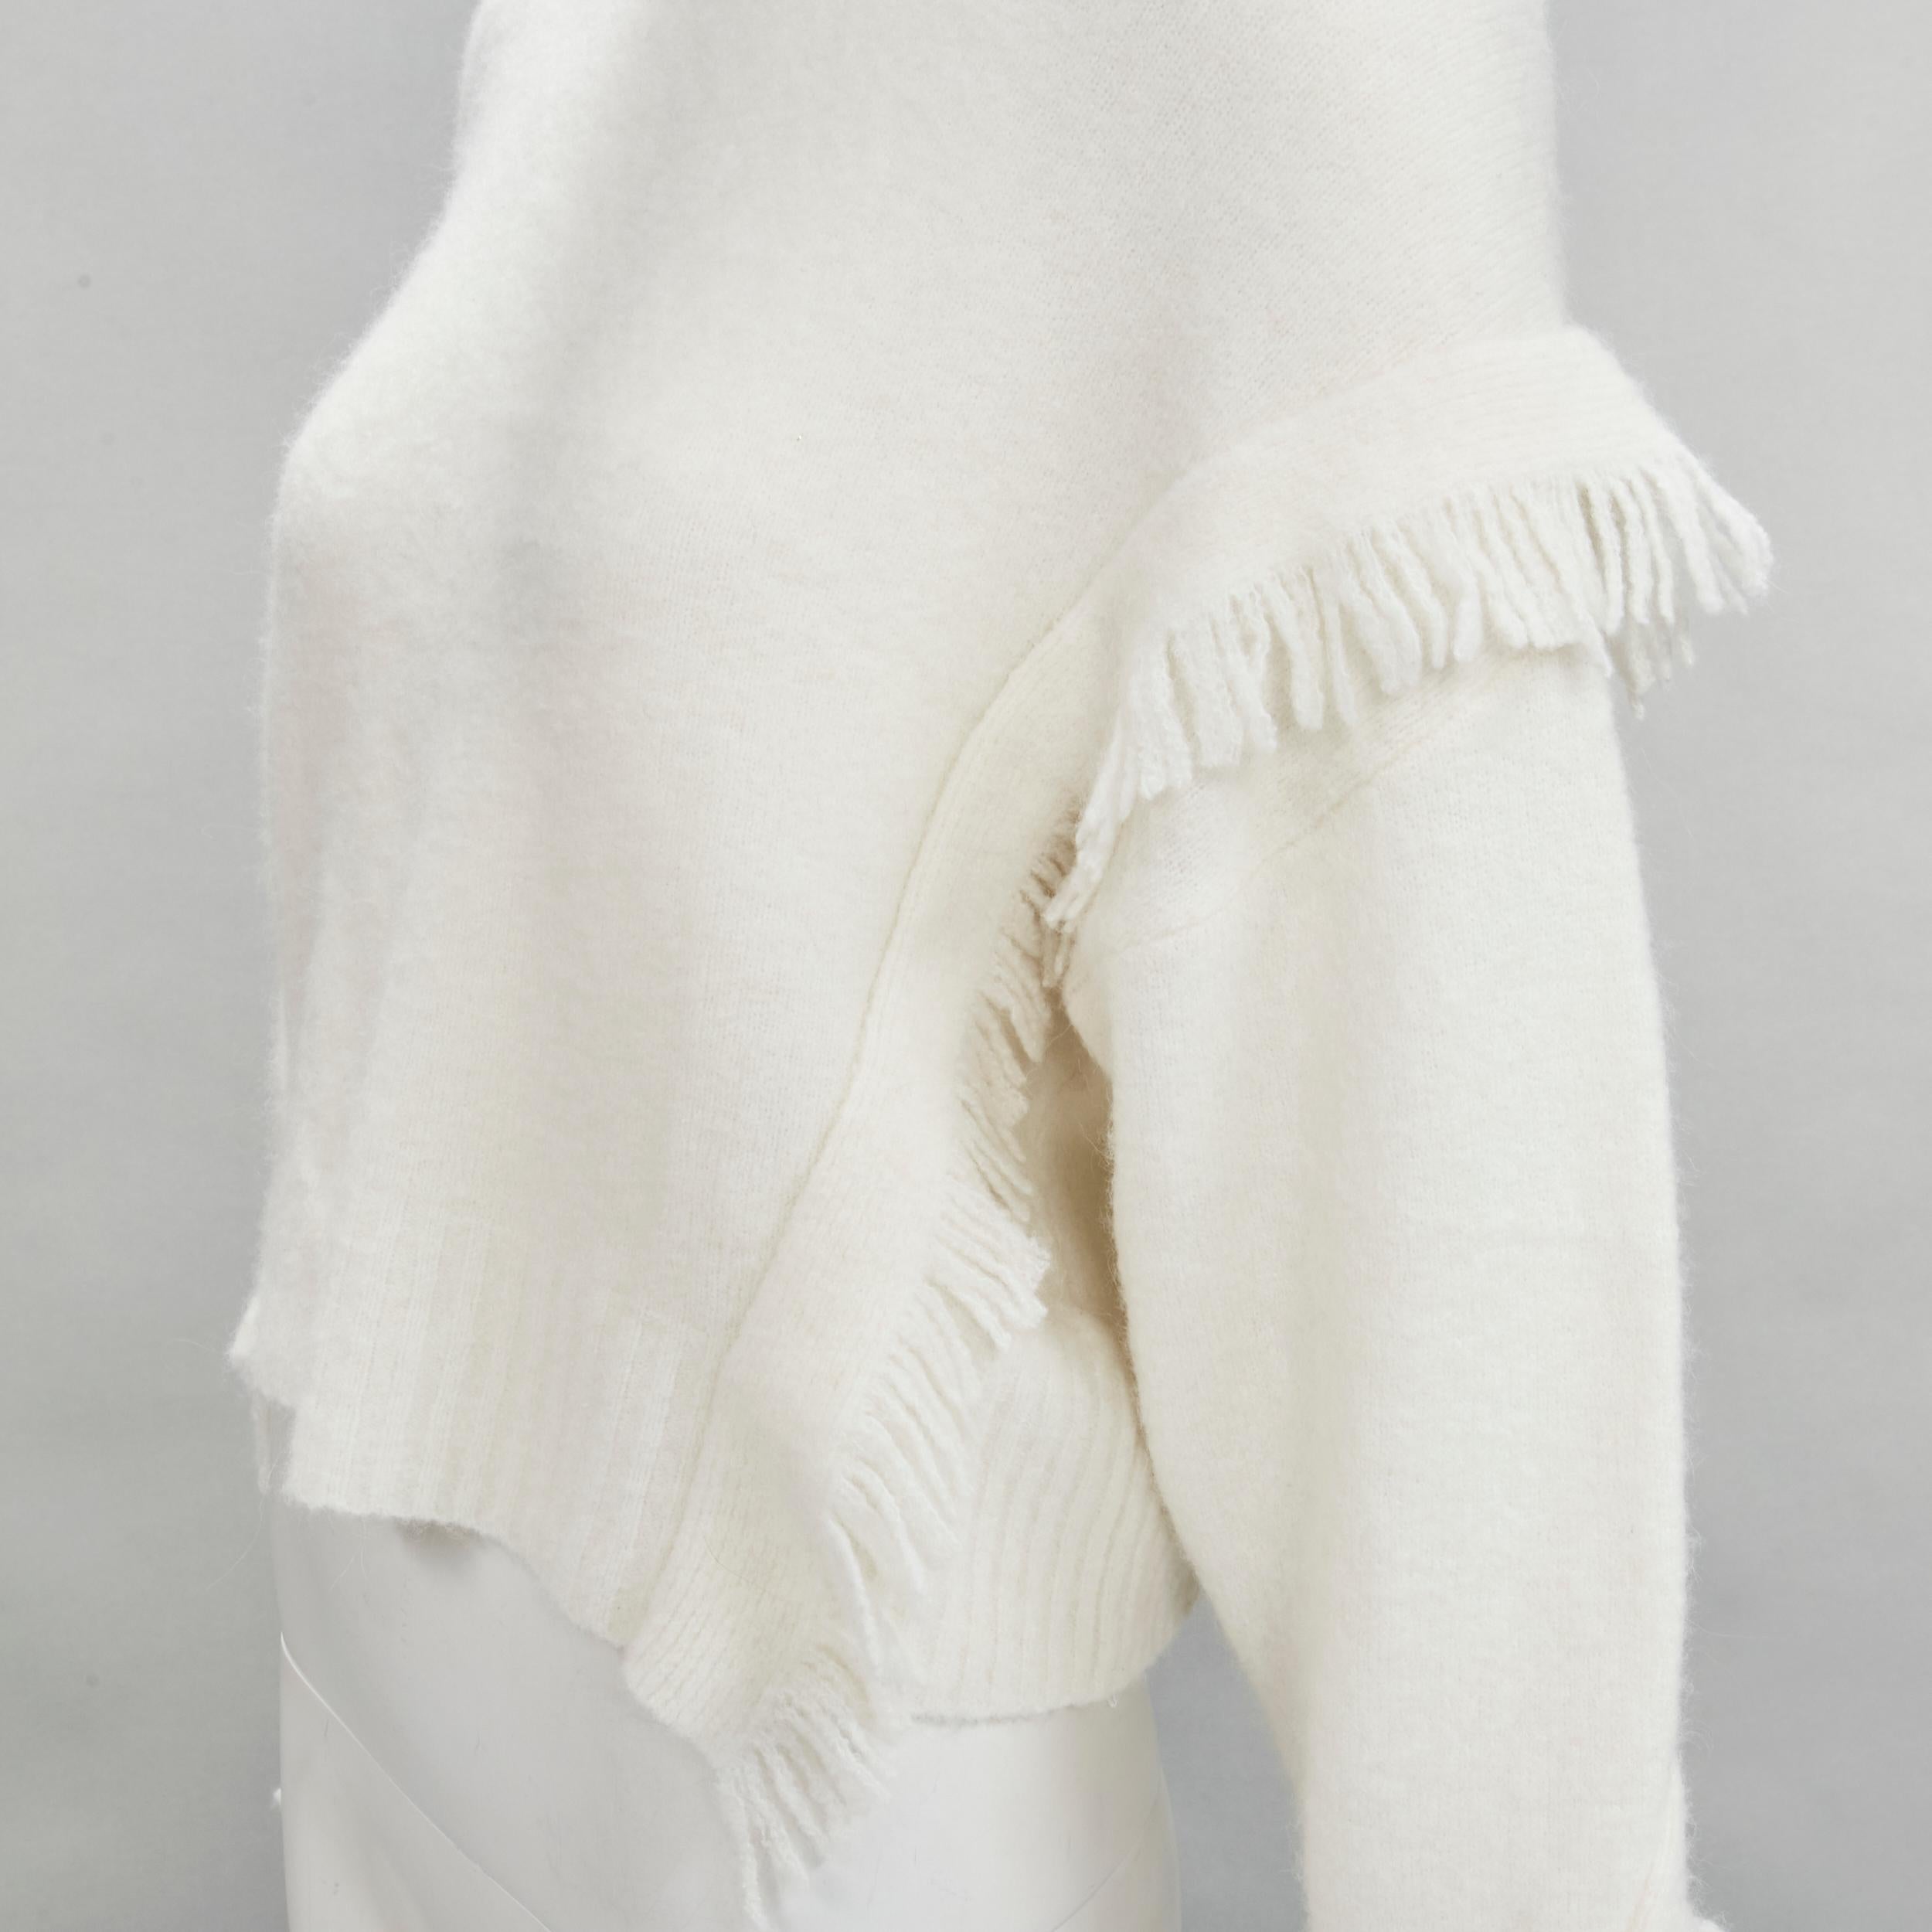 3.1 PHILLIP LIM cream soft alpaca wool blend fringe trim sweater XS
Brand: 3.1 Phillip Lim
Designer: Phillip Lim
Material: Polyamide
Color: Ecru
Pattern: Solid
Made in: China

CONDITION:
Condition: Excellent, this item was pre-owned and is in